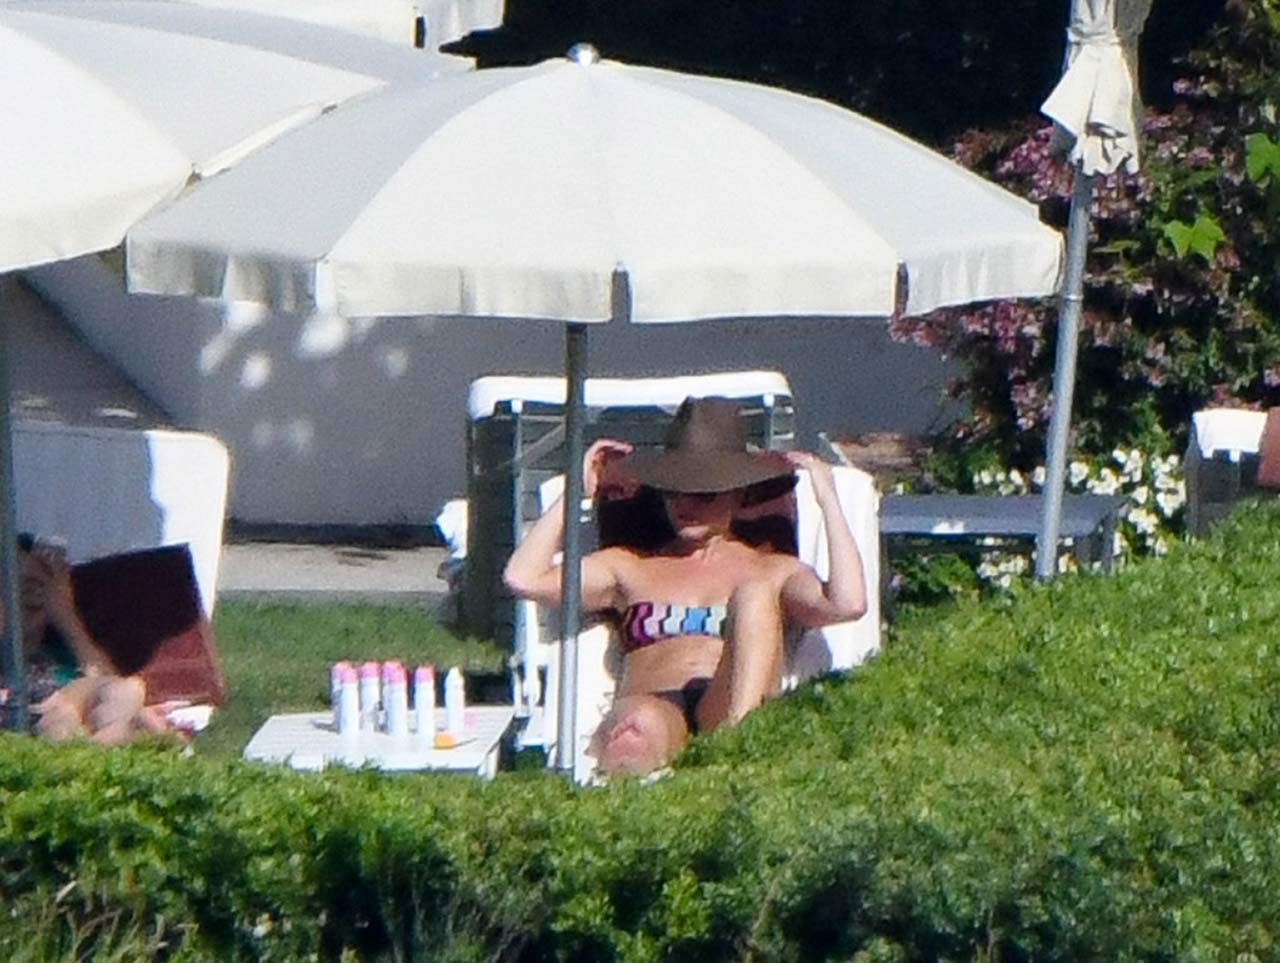 Sexy American actress Jennifer Aniston was seen sunbathing topless without ...